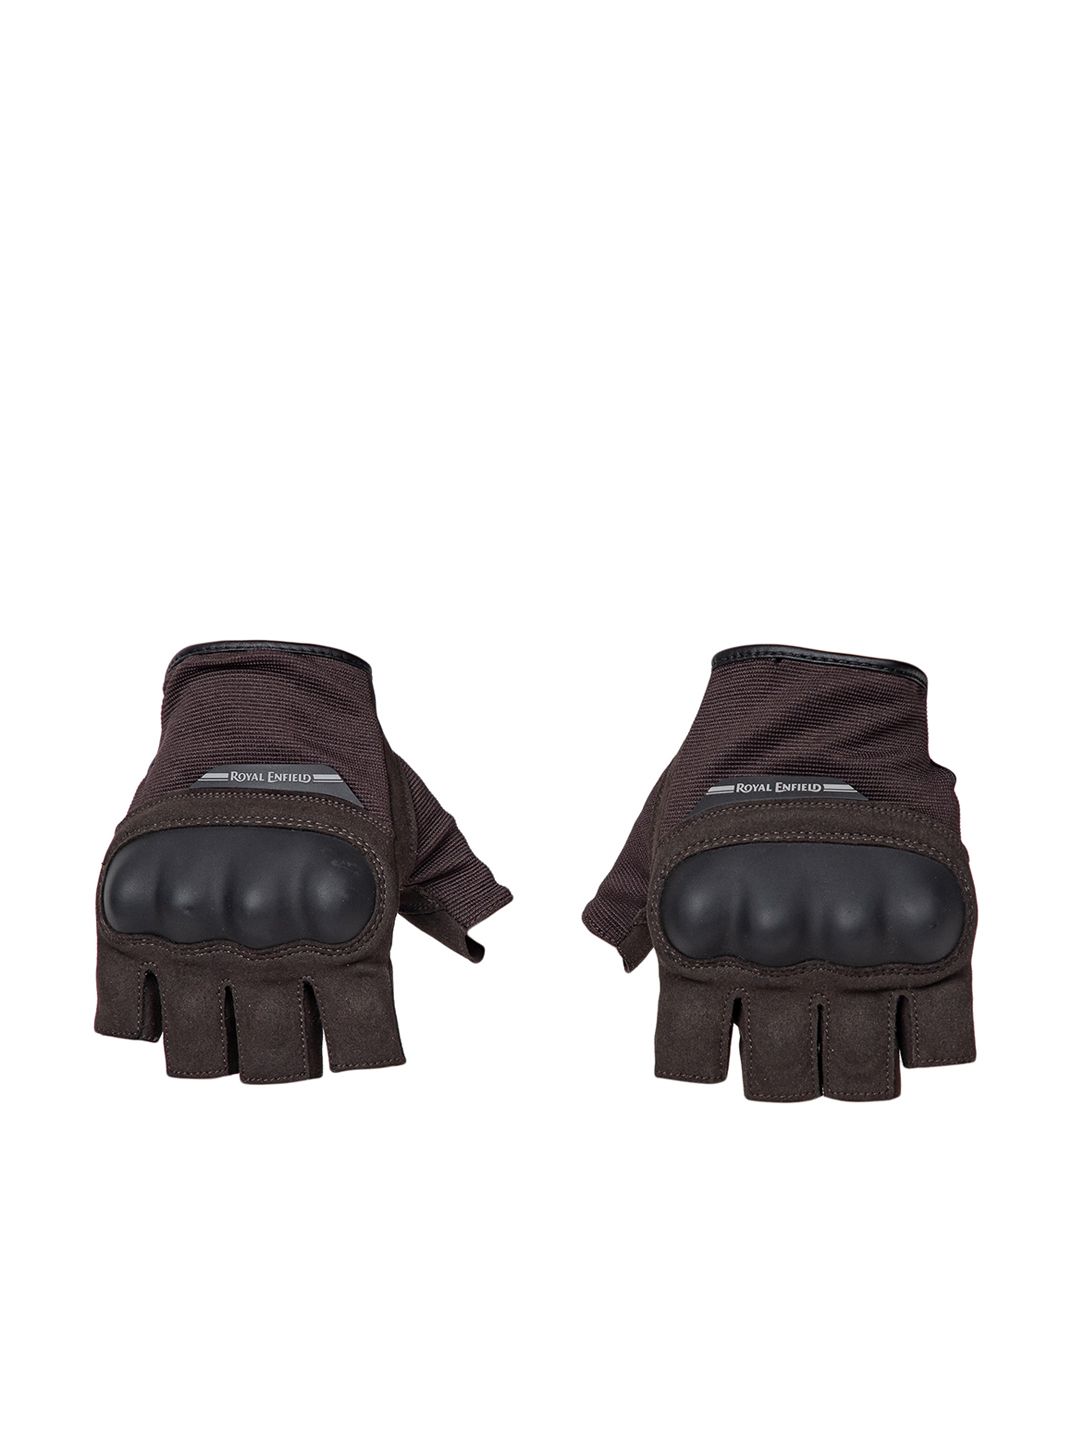 Royal Enfield Brown Solid Leather Half Gloves Price in India